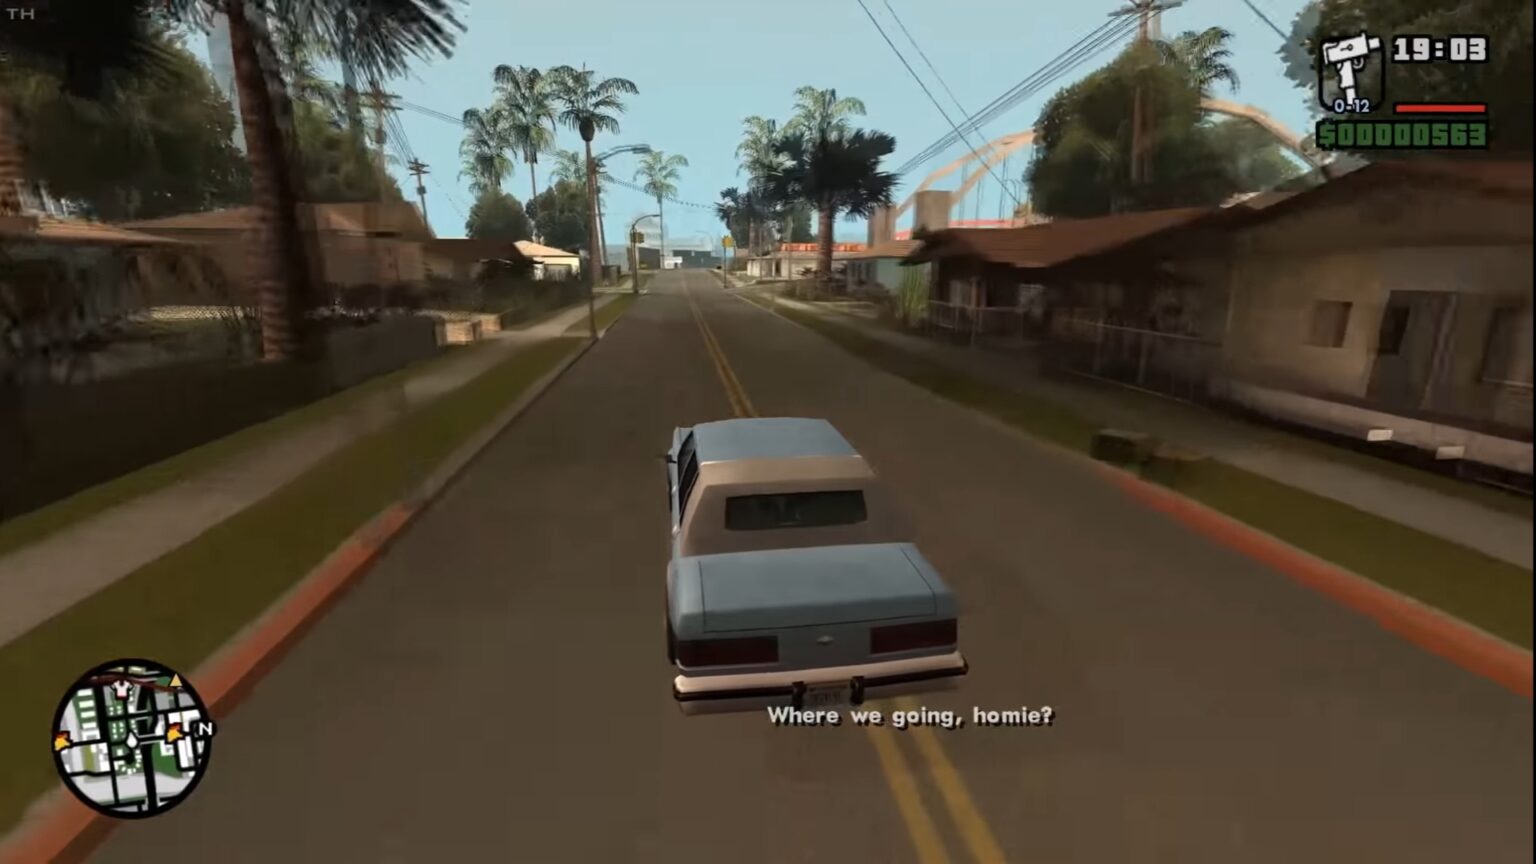 gta san andreas pc highly compressed 300mb pc